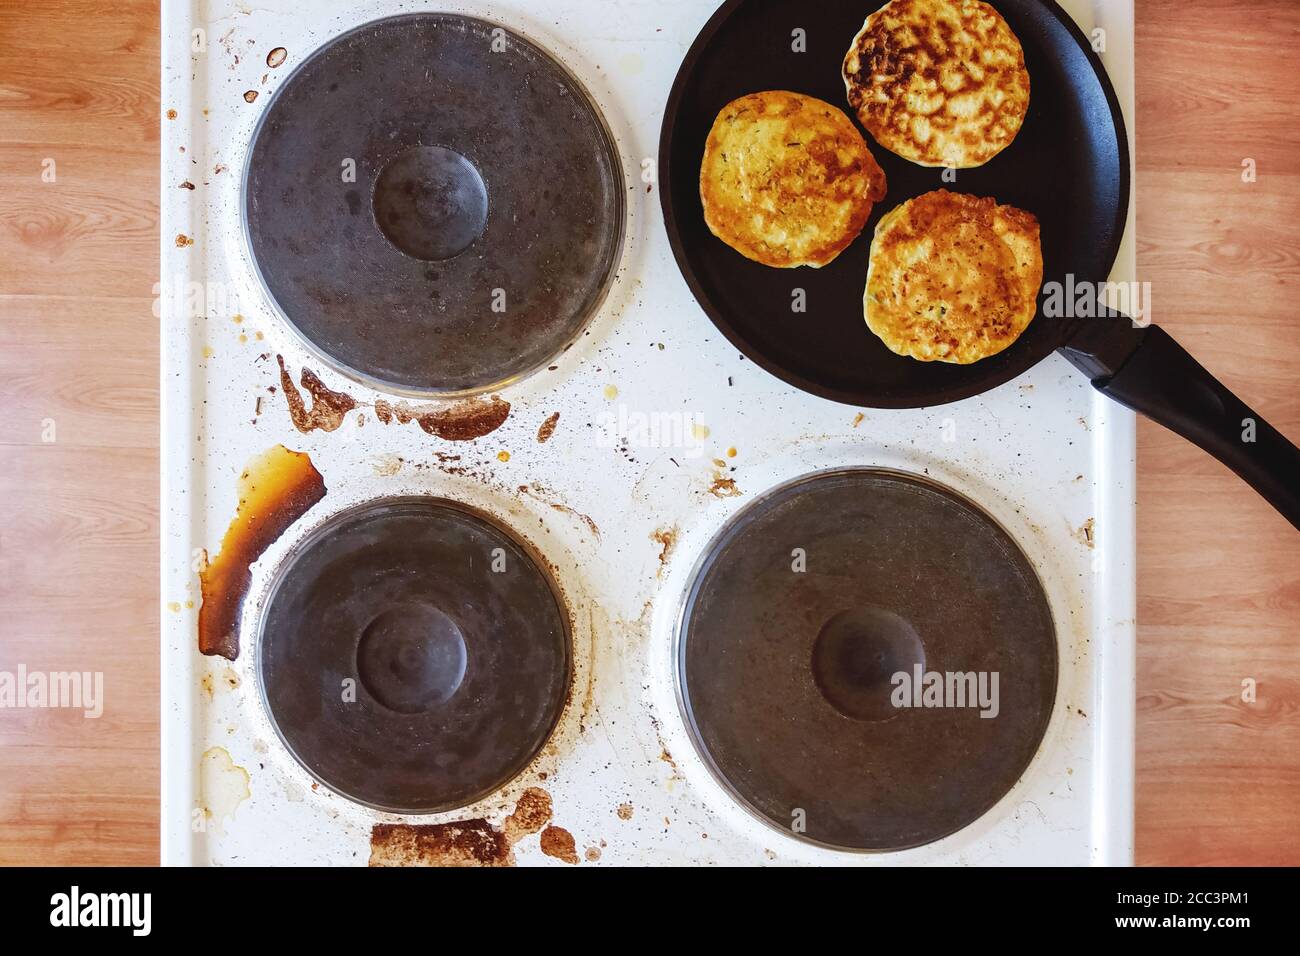 https://c8.alamy.com/comp/2CC3PM1/dirty-kitchen-stove-with-stains-of-burnt-food-and-fat-frying-pan-with-pancakes-on-top-2CC3PM1.jpg